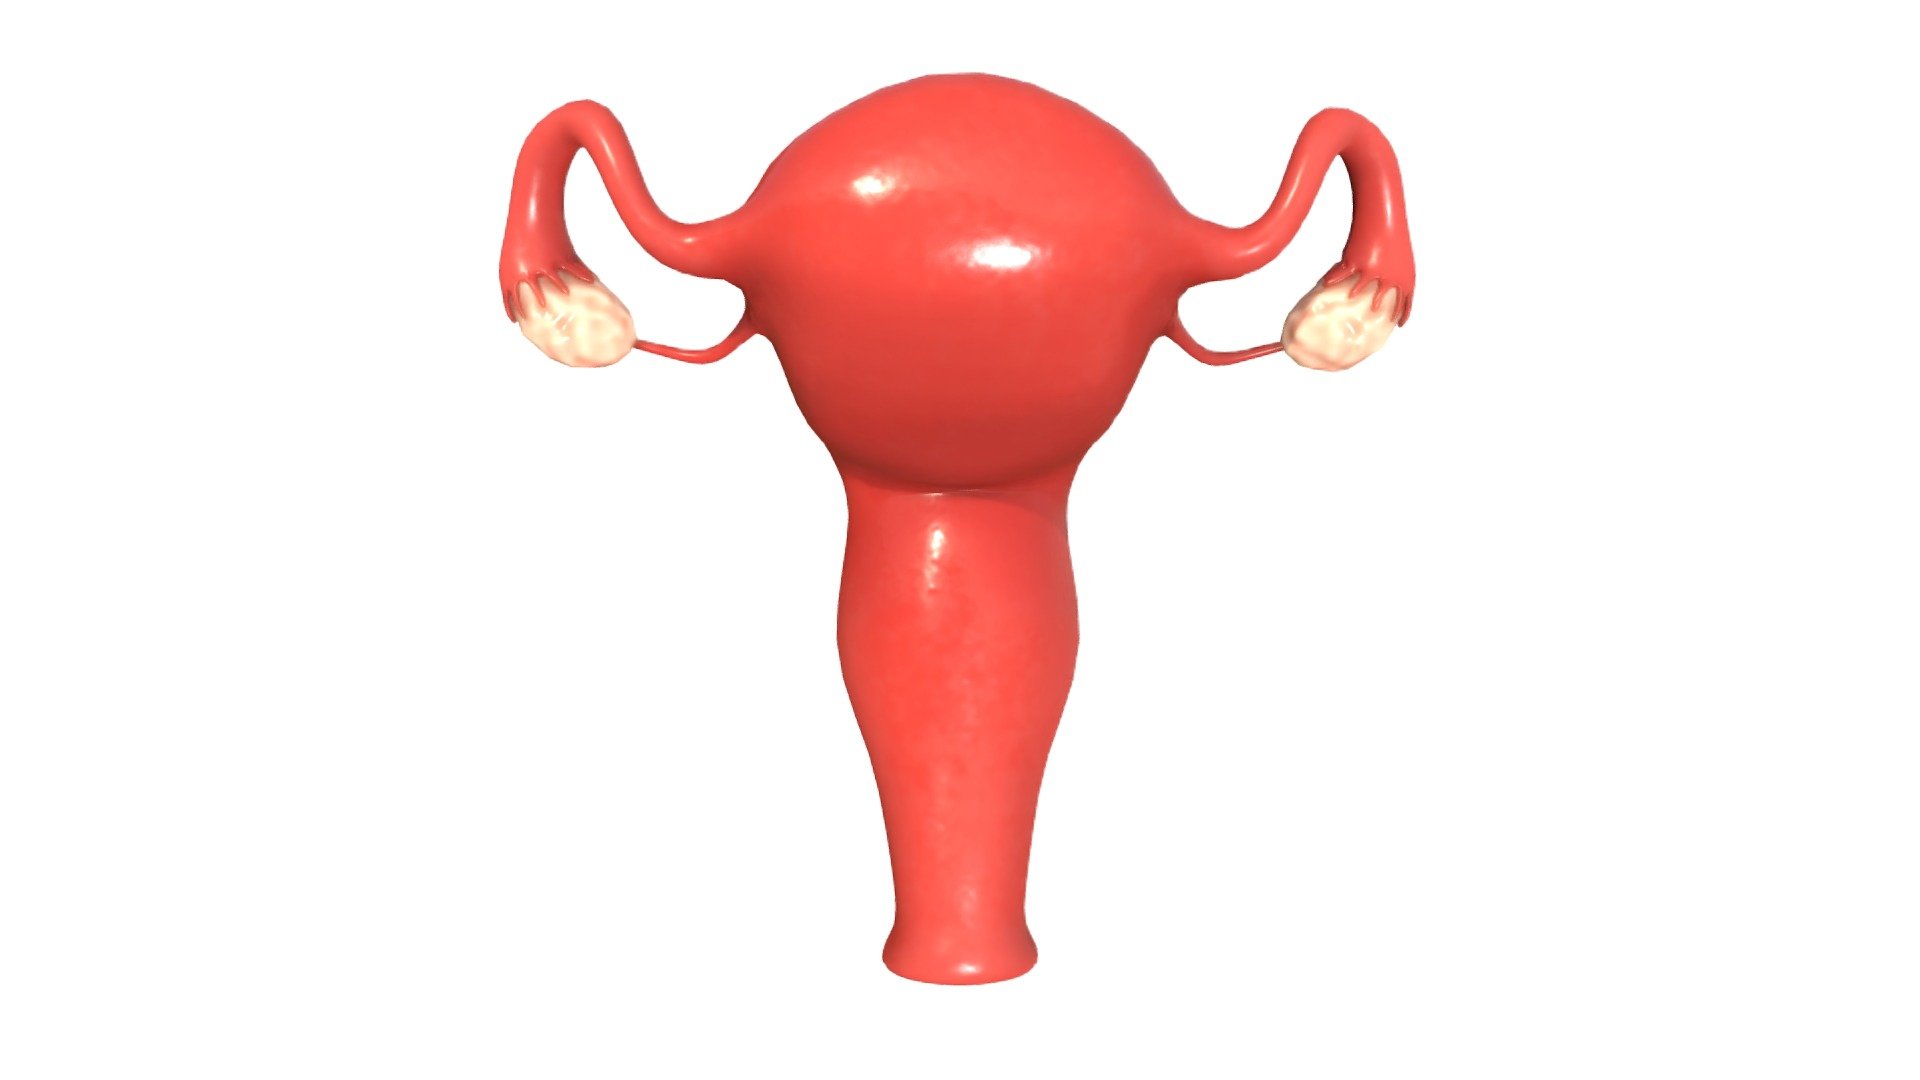 Female Reproductive System Buy Royalty Free 3d Model By Zames1992 5819418 Sketchfab Store 7472